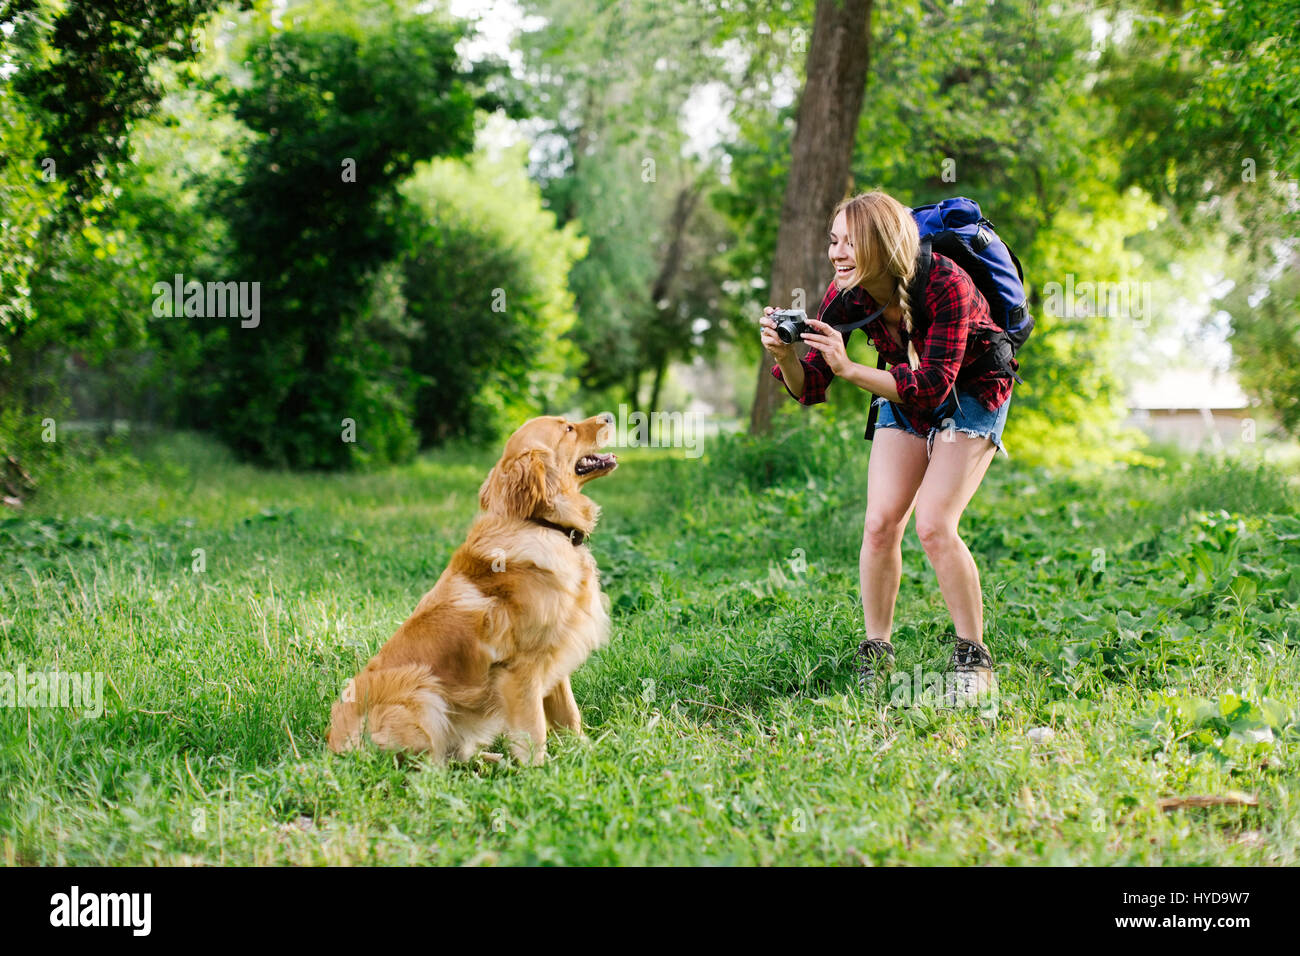 Woman photographing dog on hiking trip Stock Photo